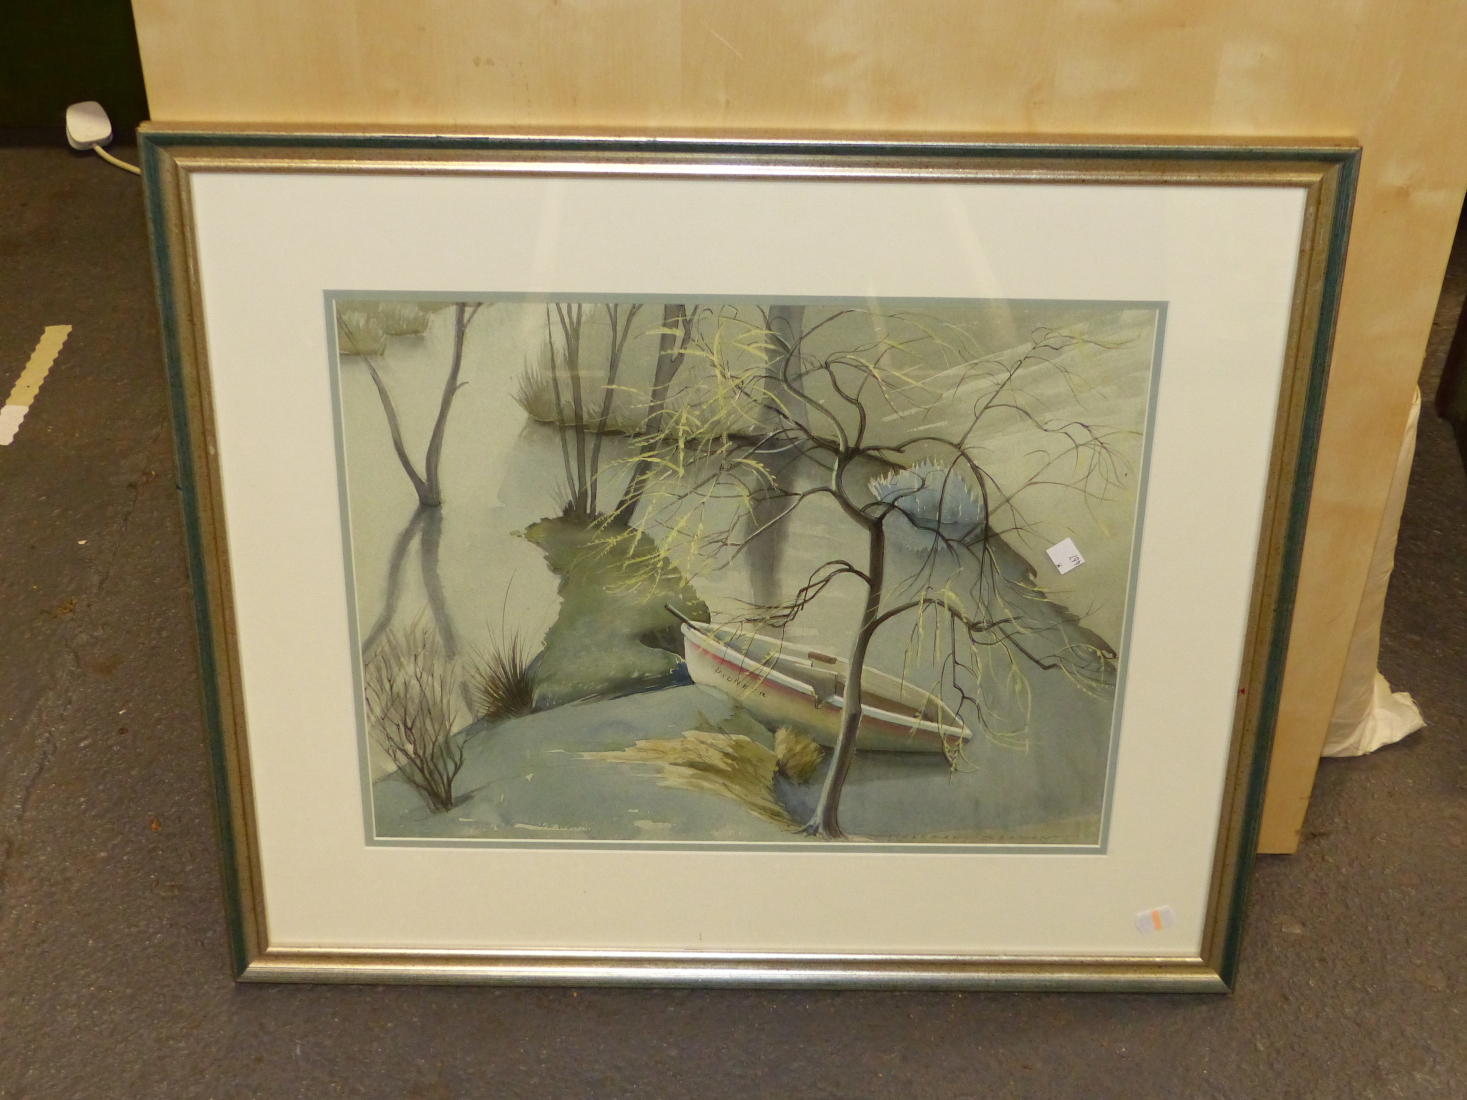 MARGARET SEATON. (1917-2003) ARR SPRING AT TEMPLE GUITING, SIGNED WATERCOLOUR. 37 x 47.5cms. - Image 2 of 2